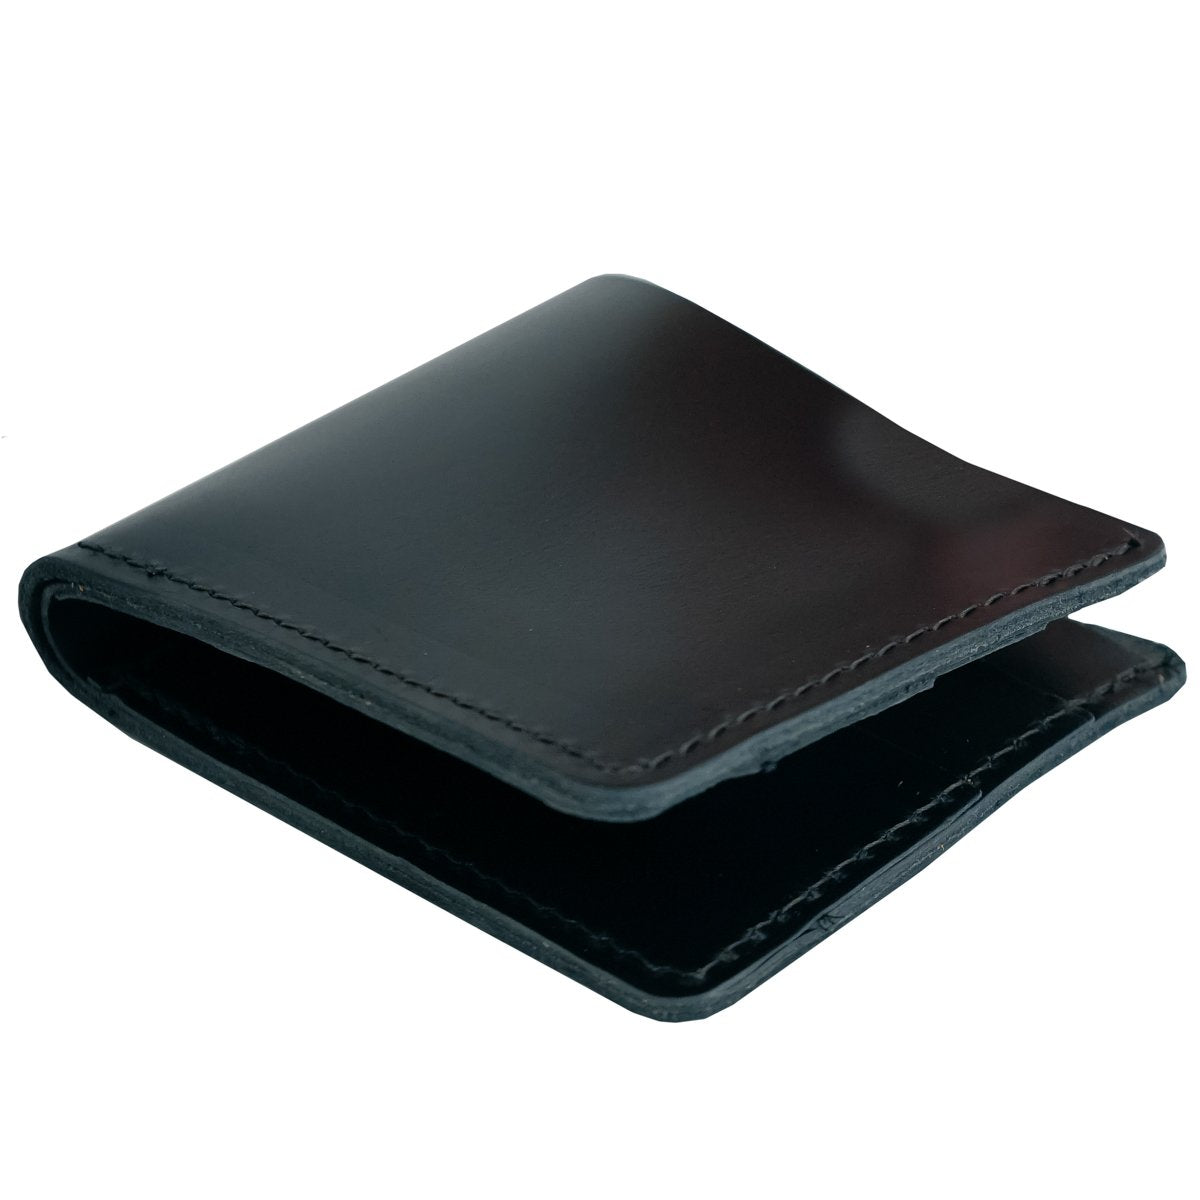 BC012NL - Cuadra Black Exotic Bifold Wallet in Niloticus Leather for Men